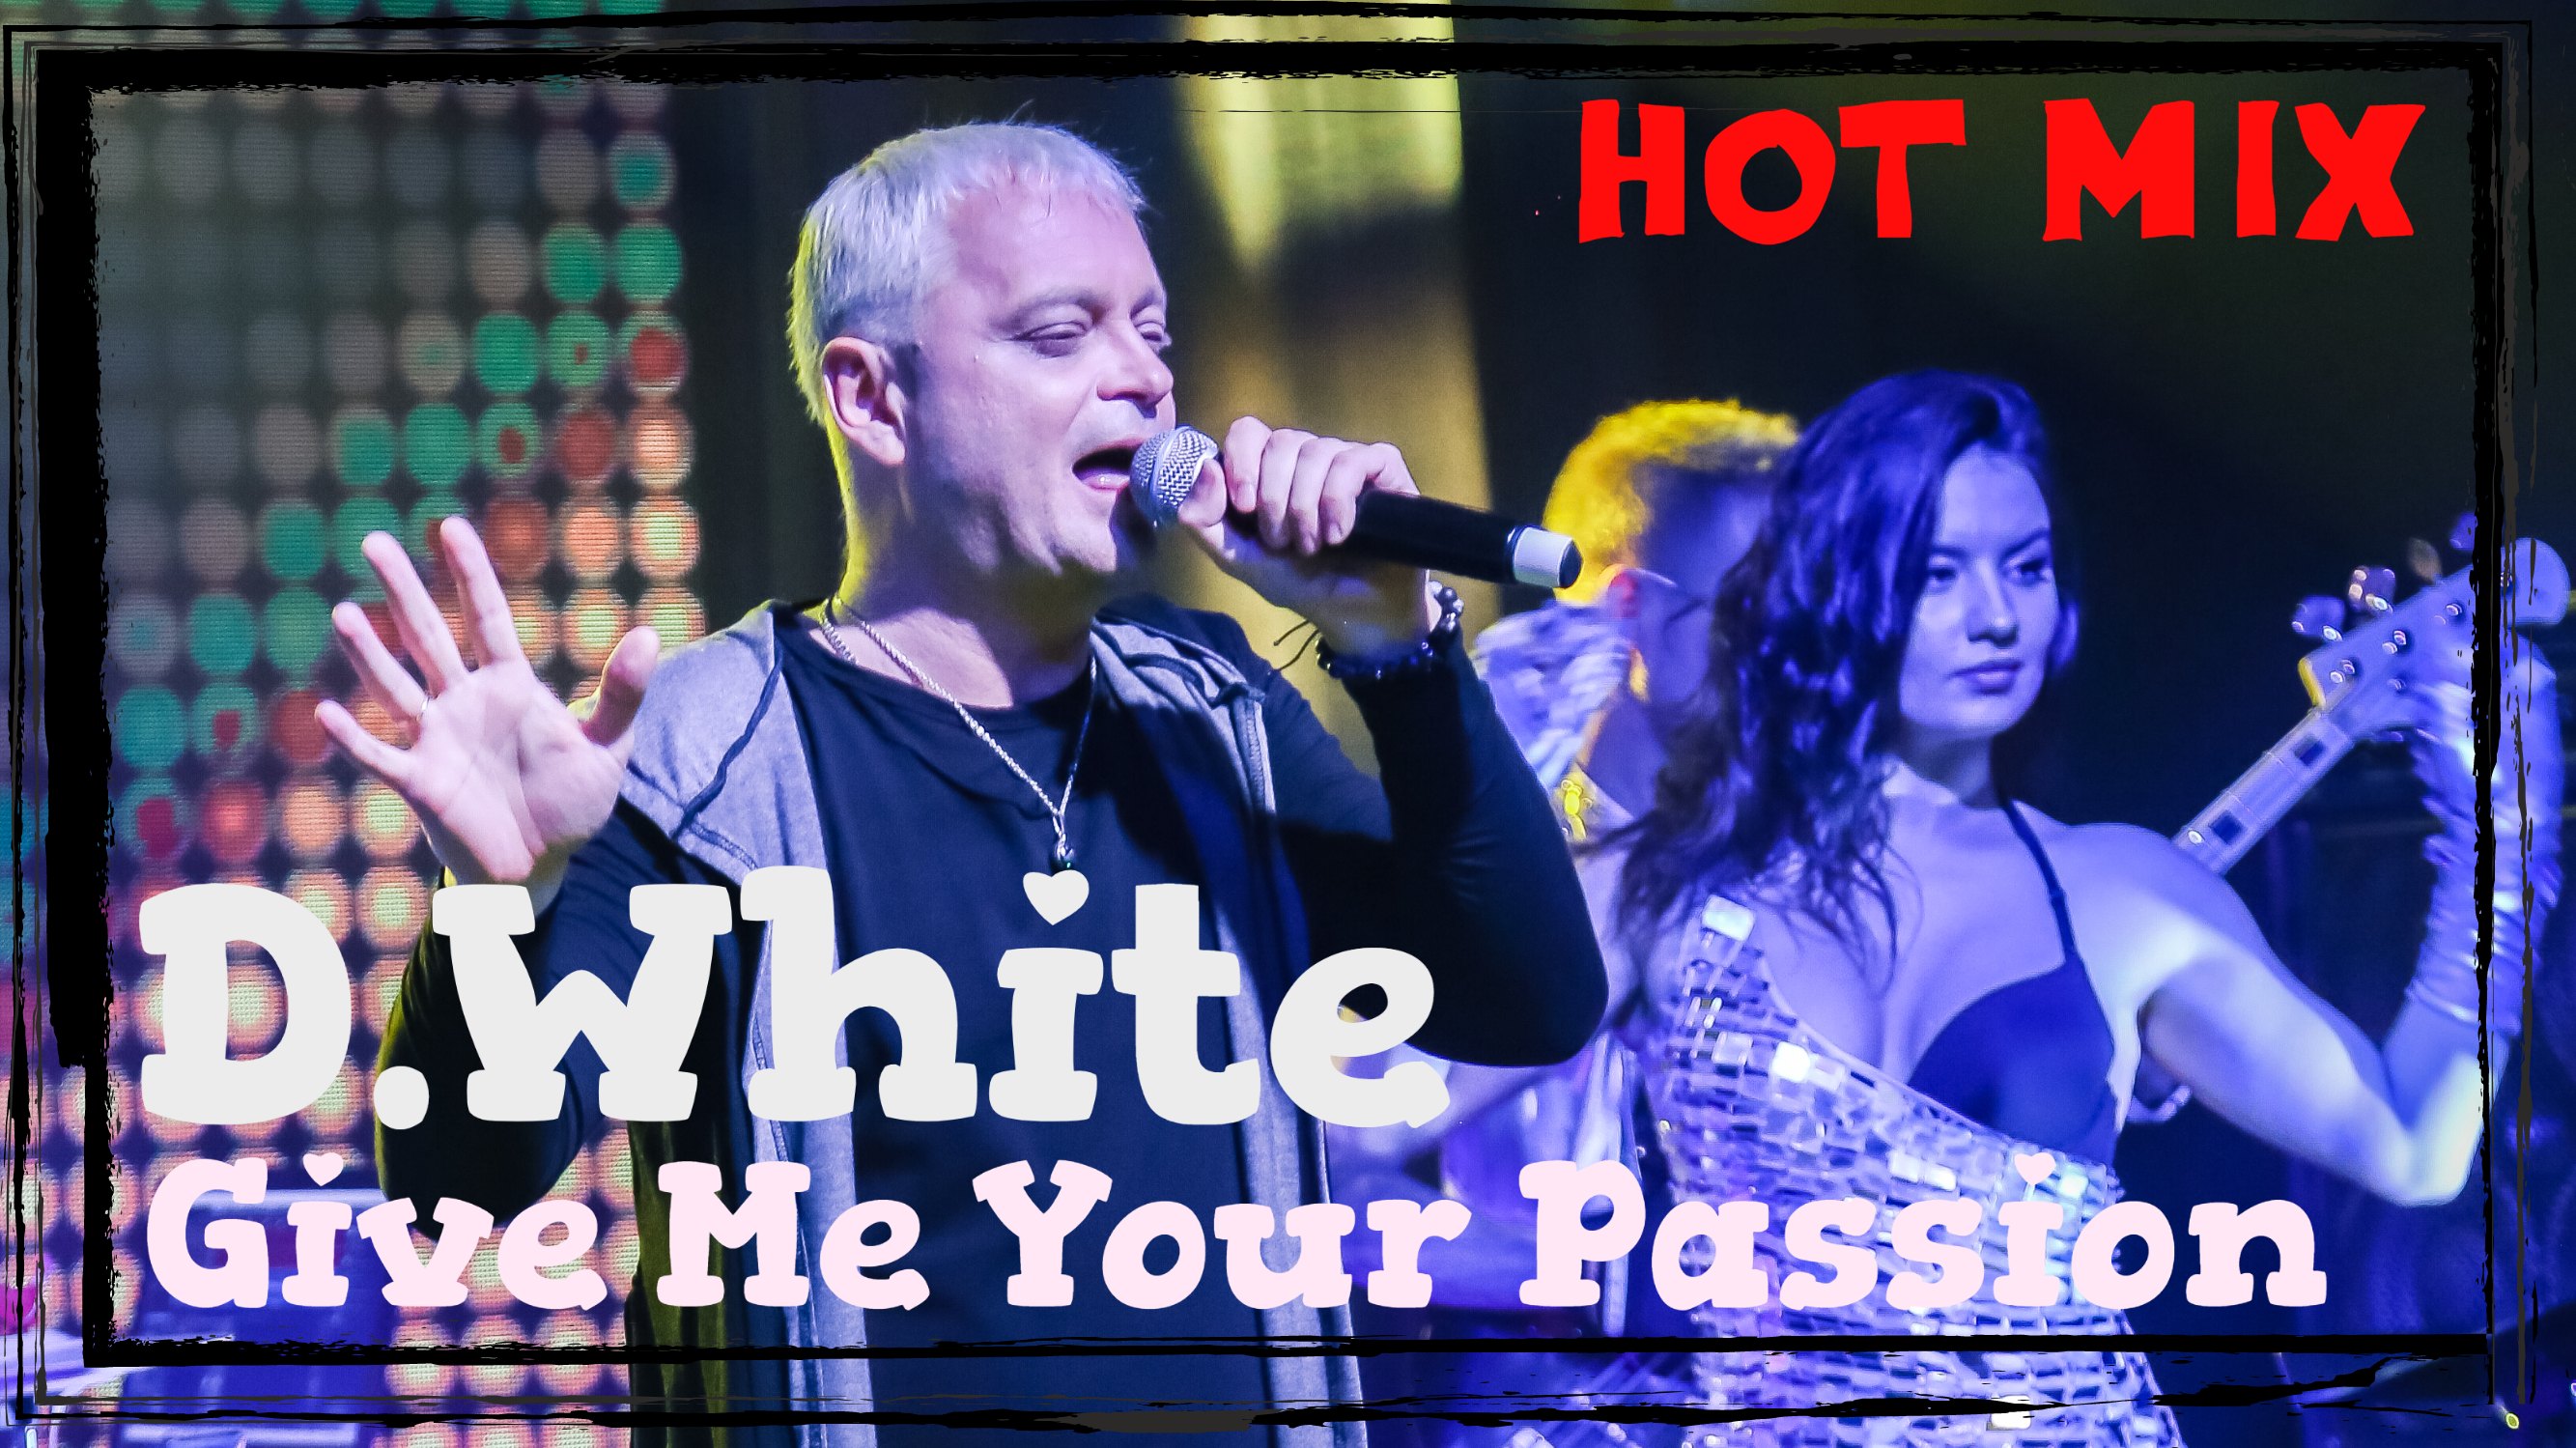 D.White - Give Me Your Passion (Hot Mix). NEW ITALO DISCO, Euro Disco, Europop, music of the 80-90s